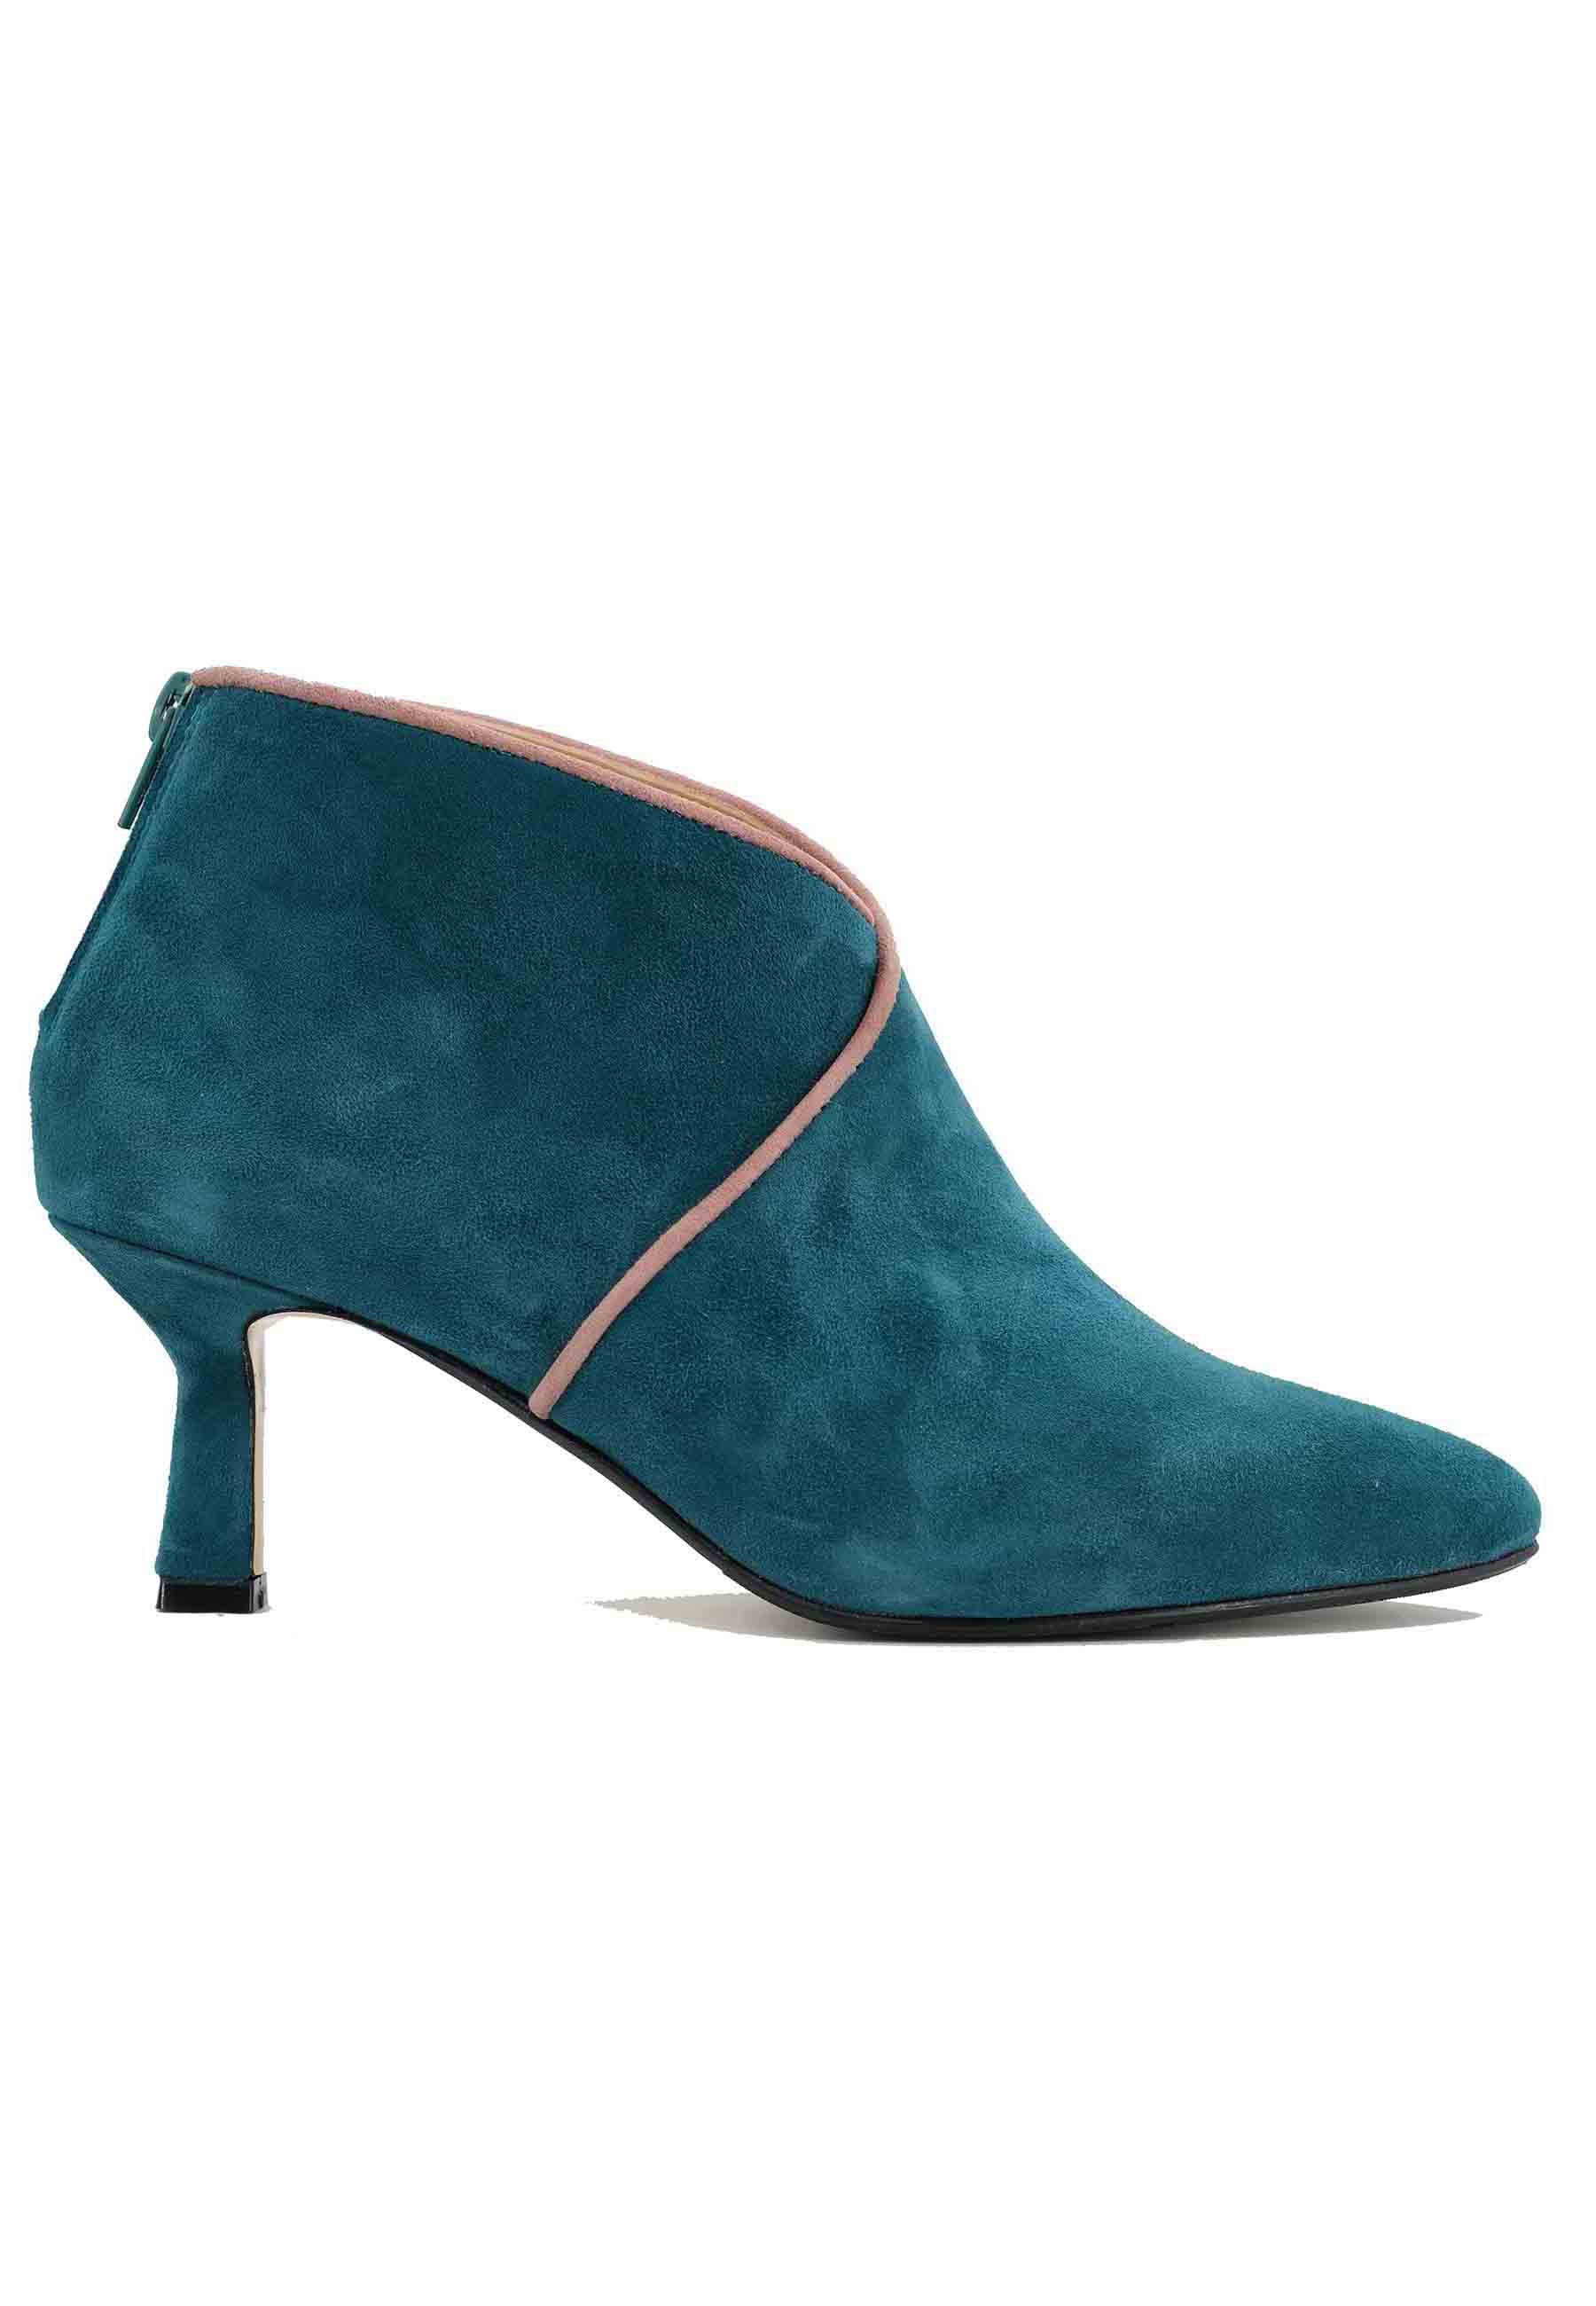 TR1662/RT ankle boots in ocean blue suede with rear zip